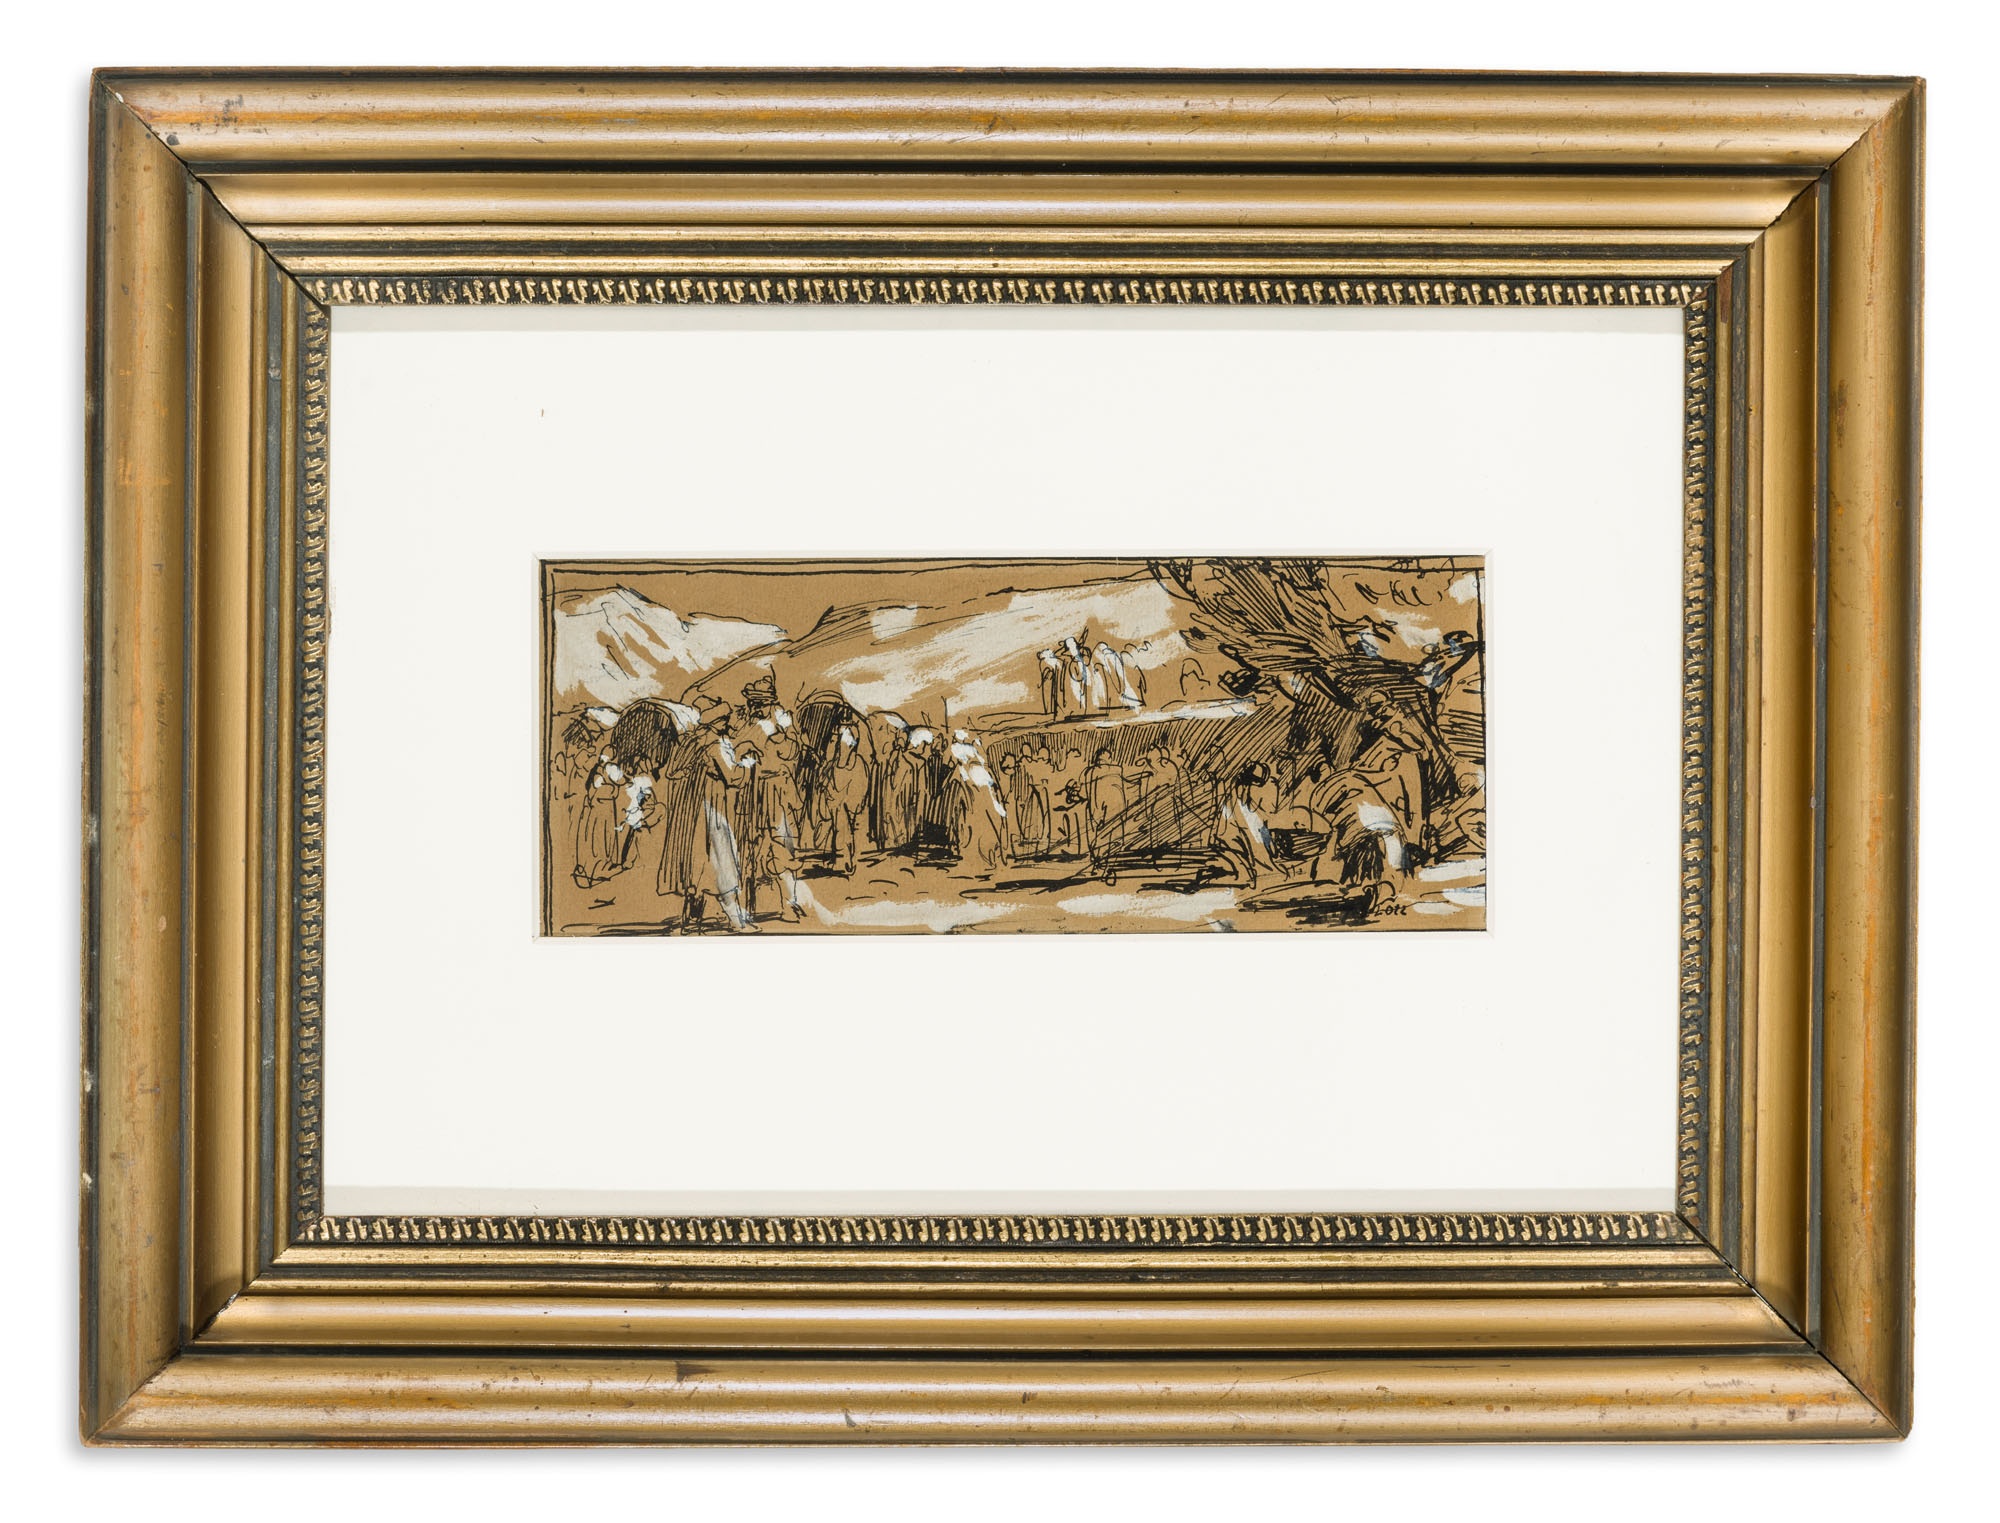 Károly Lotz: untitled (study for a historical scene) (The Salgo Trust for Education CC BY-NC-SA)